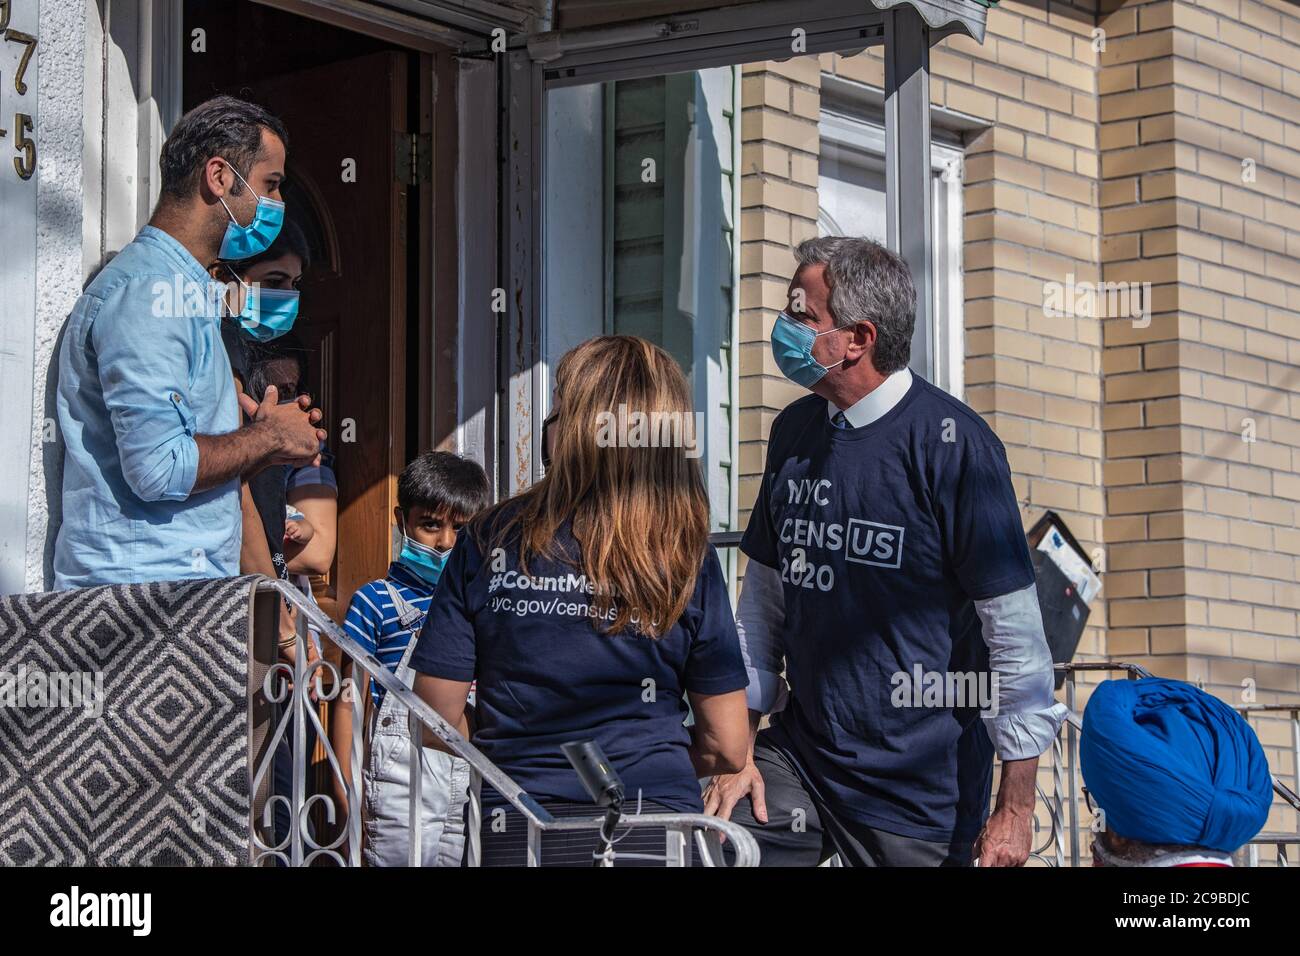 New York, United States. 29th July, 2020. Mayor Bill de Blasio and NYC Census 2020 Director Julie Menin talk to Mr. Dodwani and family in Queens borough, New York City.Mayor Bill de Blasio and NYC Census 2020 Director Julie Menin go door-knocking to encourage New Yorkers to complete the census in South Richmond Hill, Queens. Credit: SOPA Images Limited/Alamy Live News Stock Photo